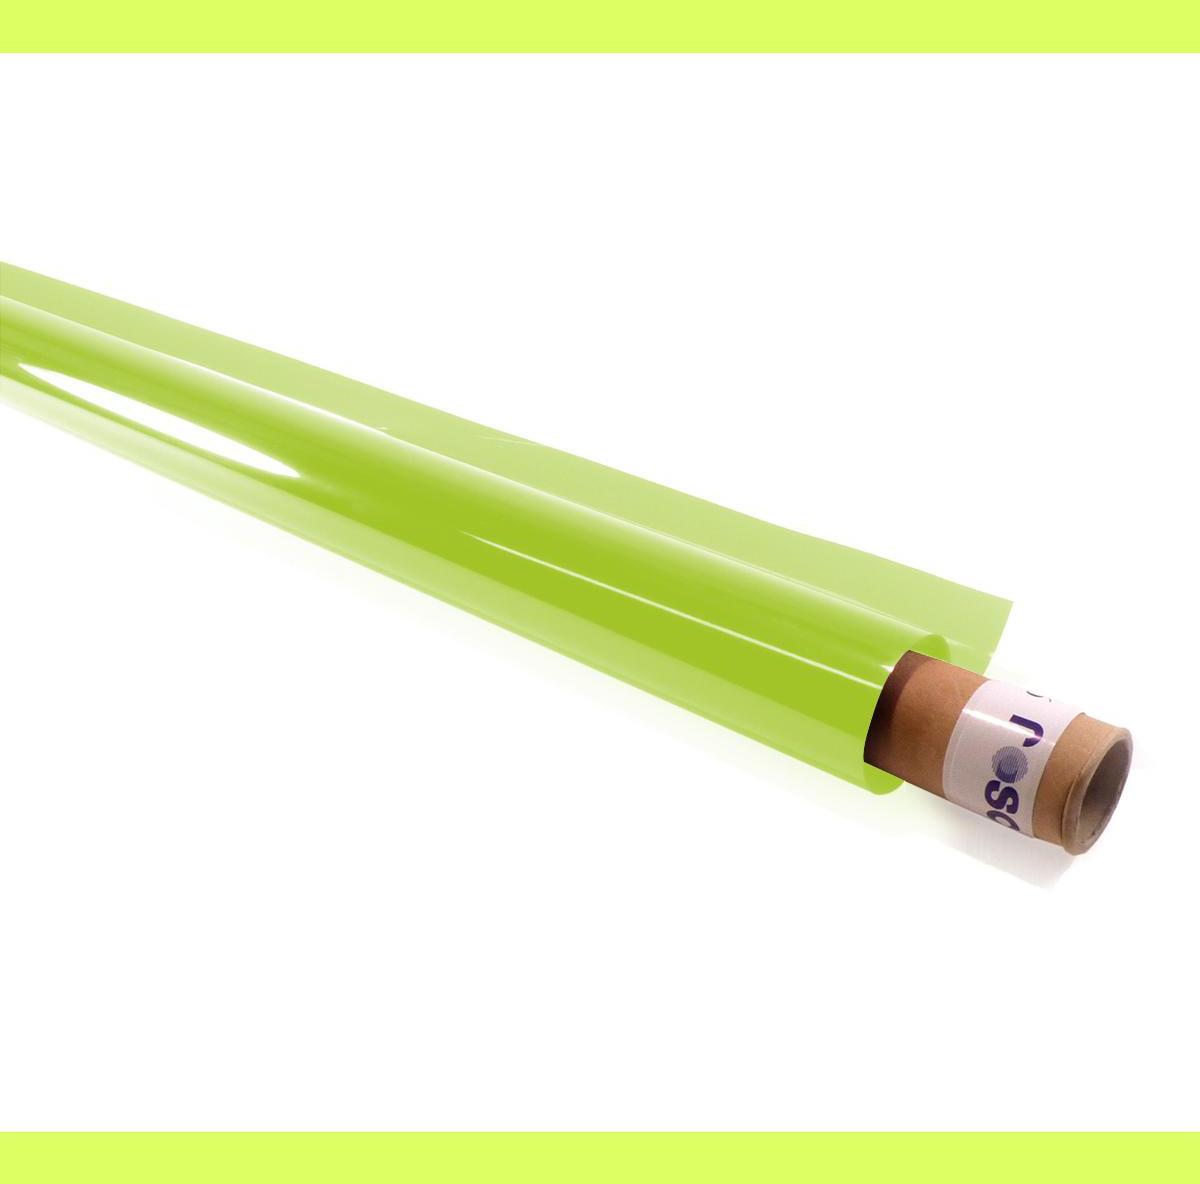 An image of 088 Lime Green Lighting Gel Roll